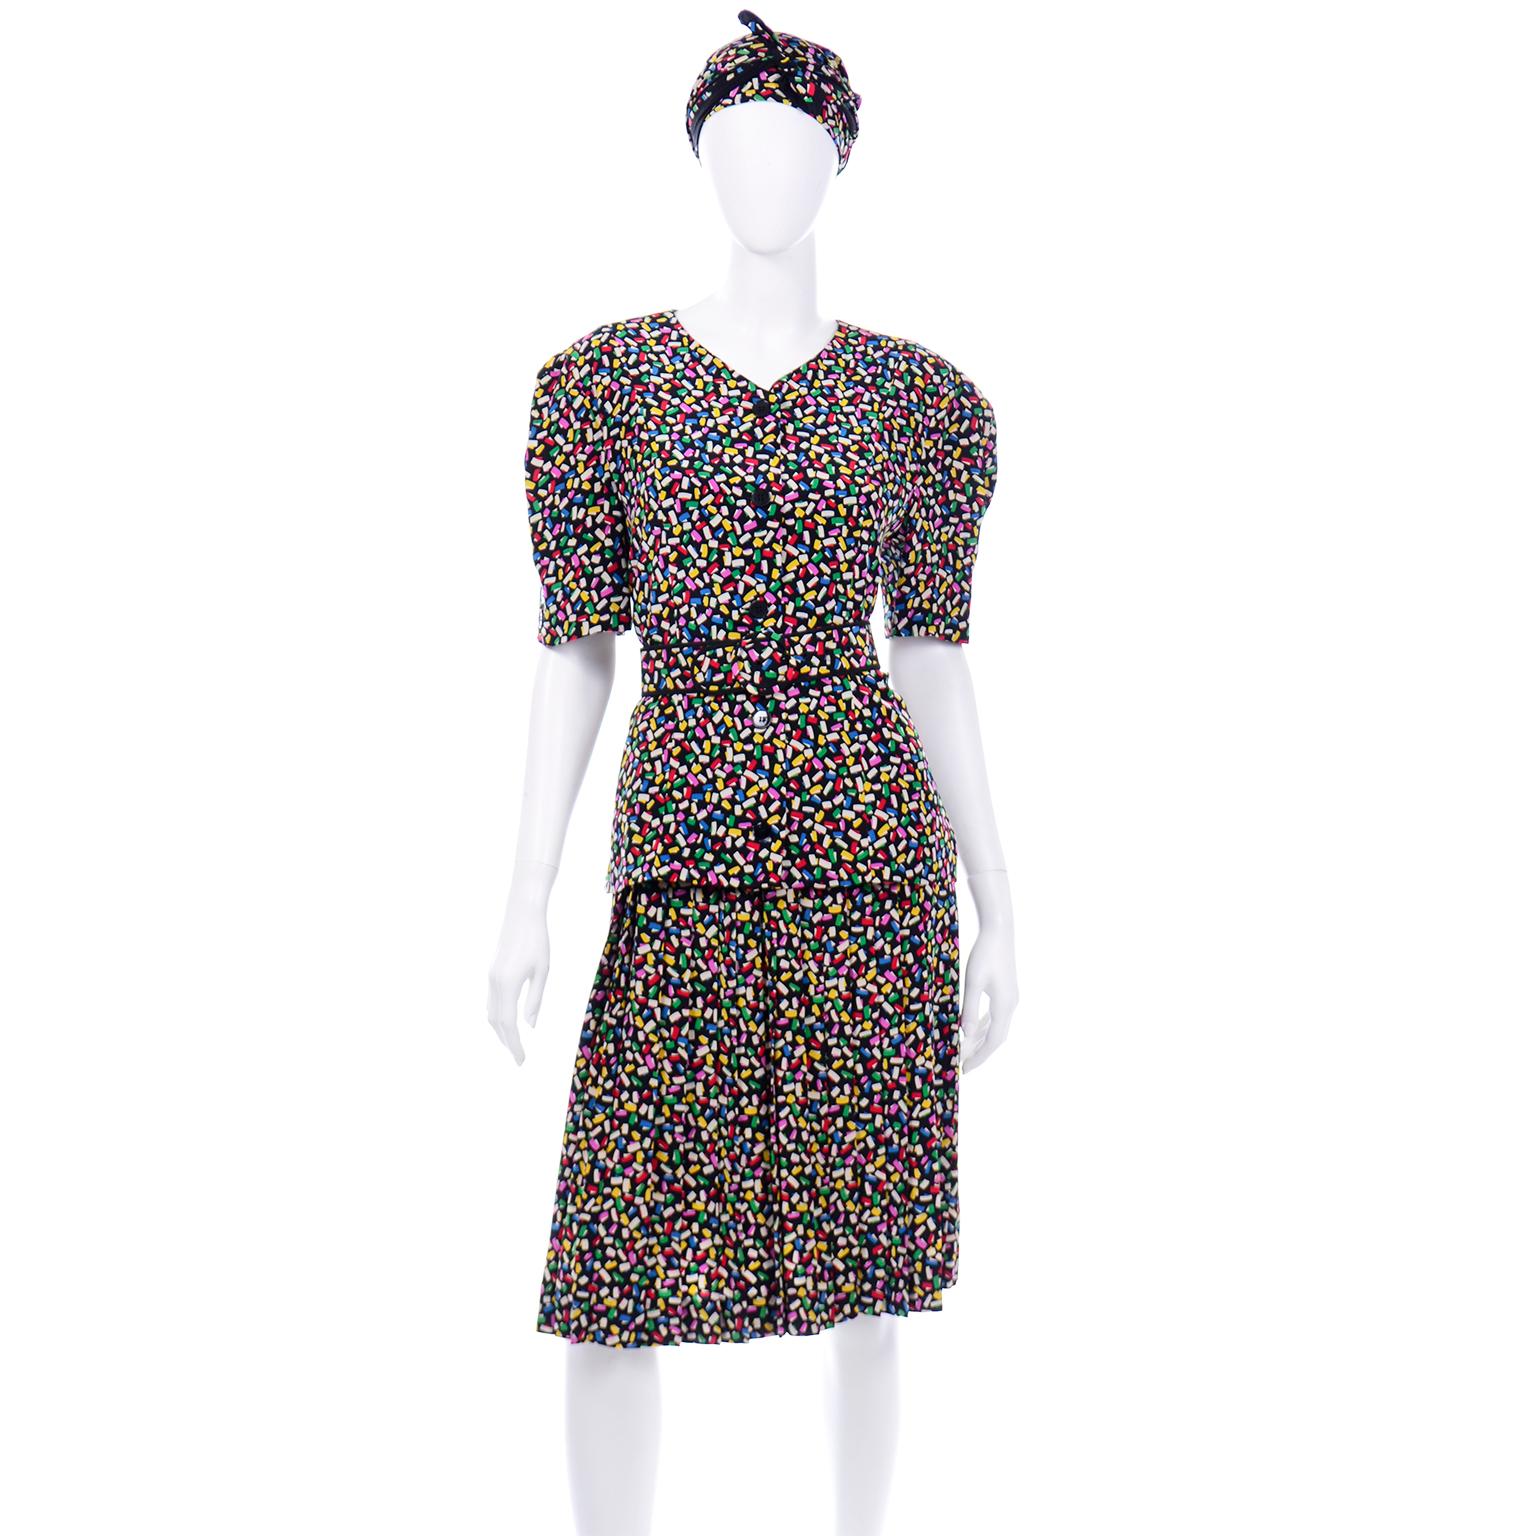 This is such a playful vintage 2 piece silk dress from Albert Nipon in a fun, colorful confetti print! We have always loved Albert Nipon and if you decide to buy a vintage Nipon dress, you will fall instantly in love with the way they feel when